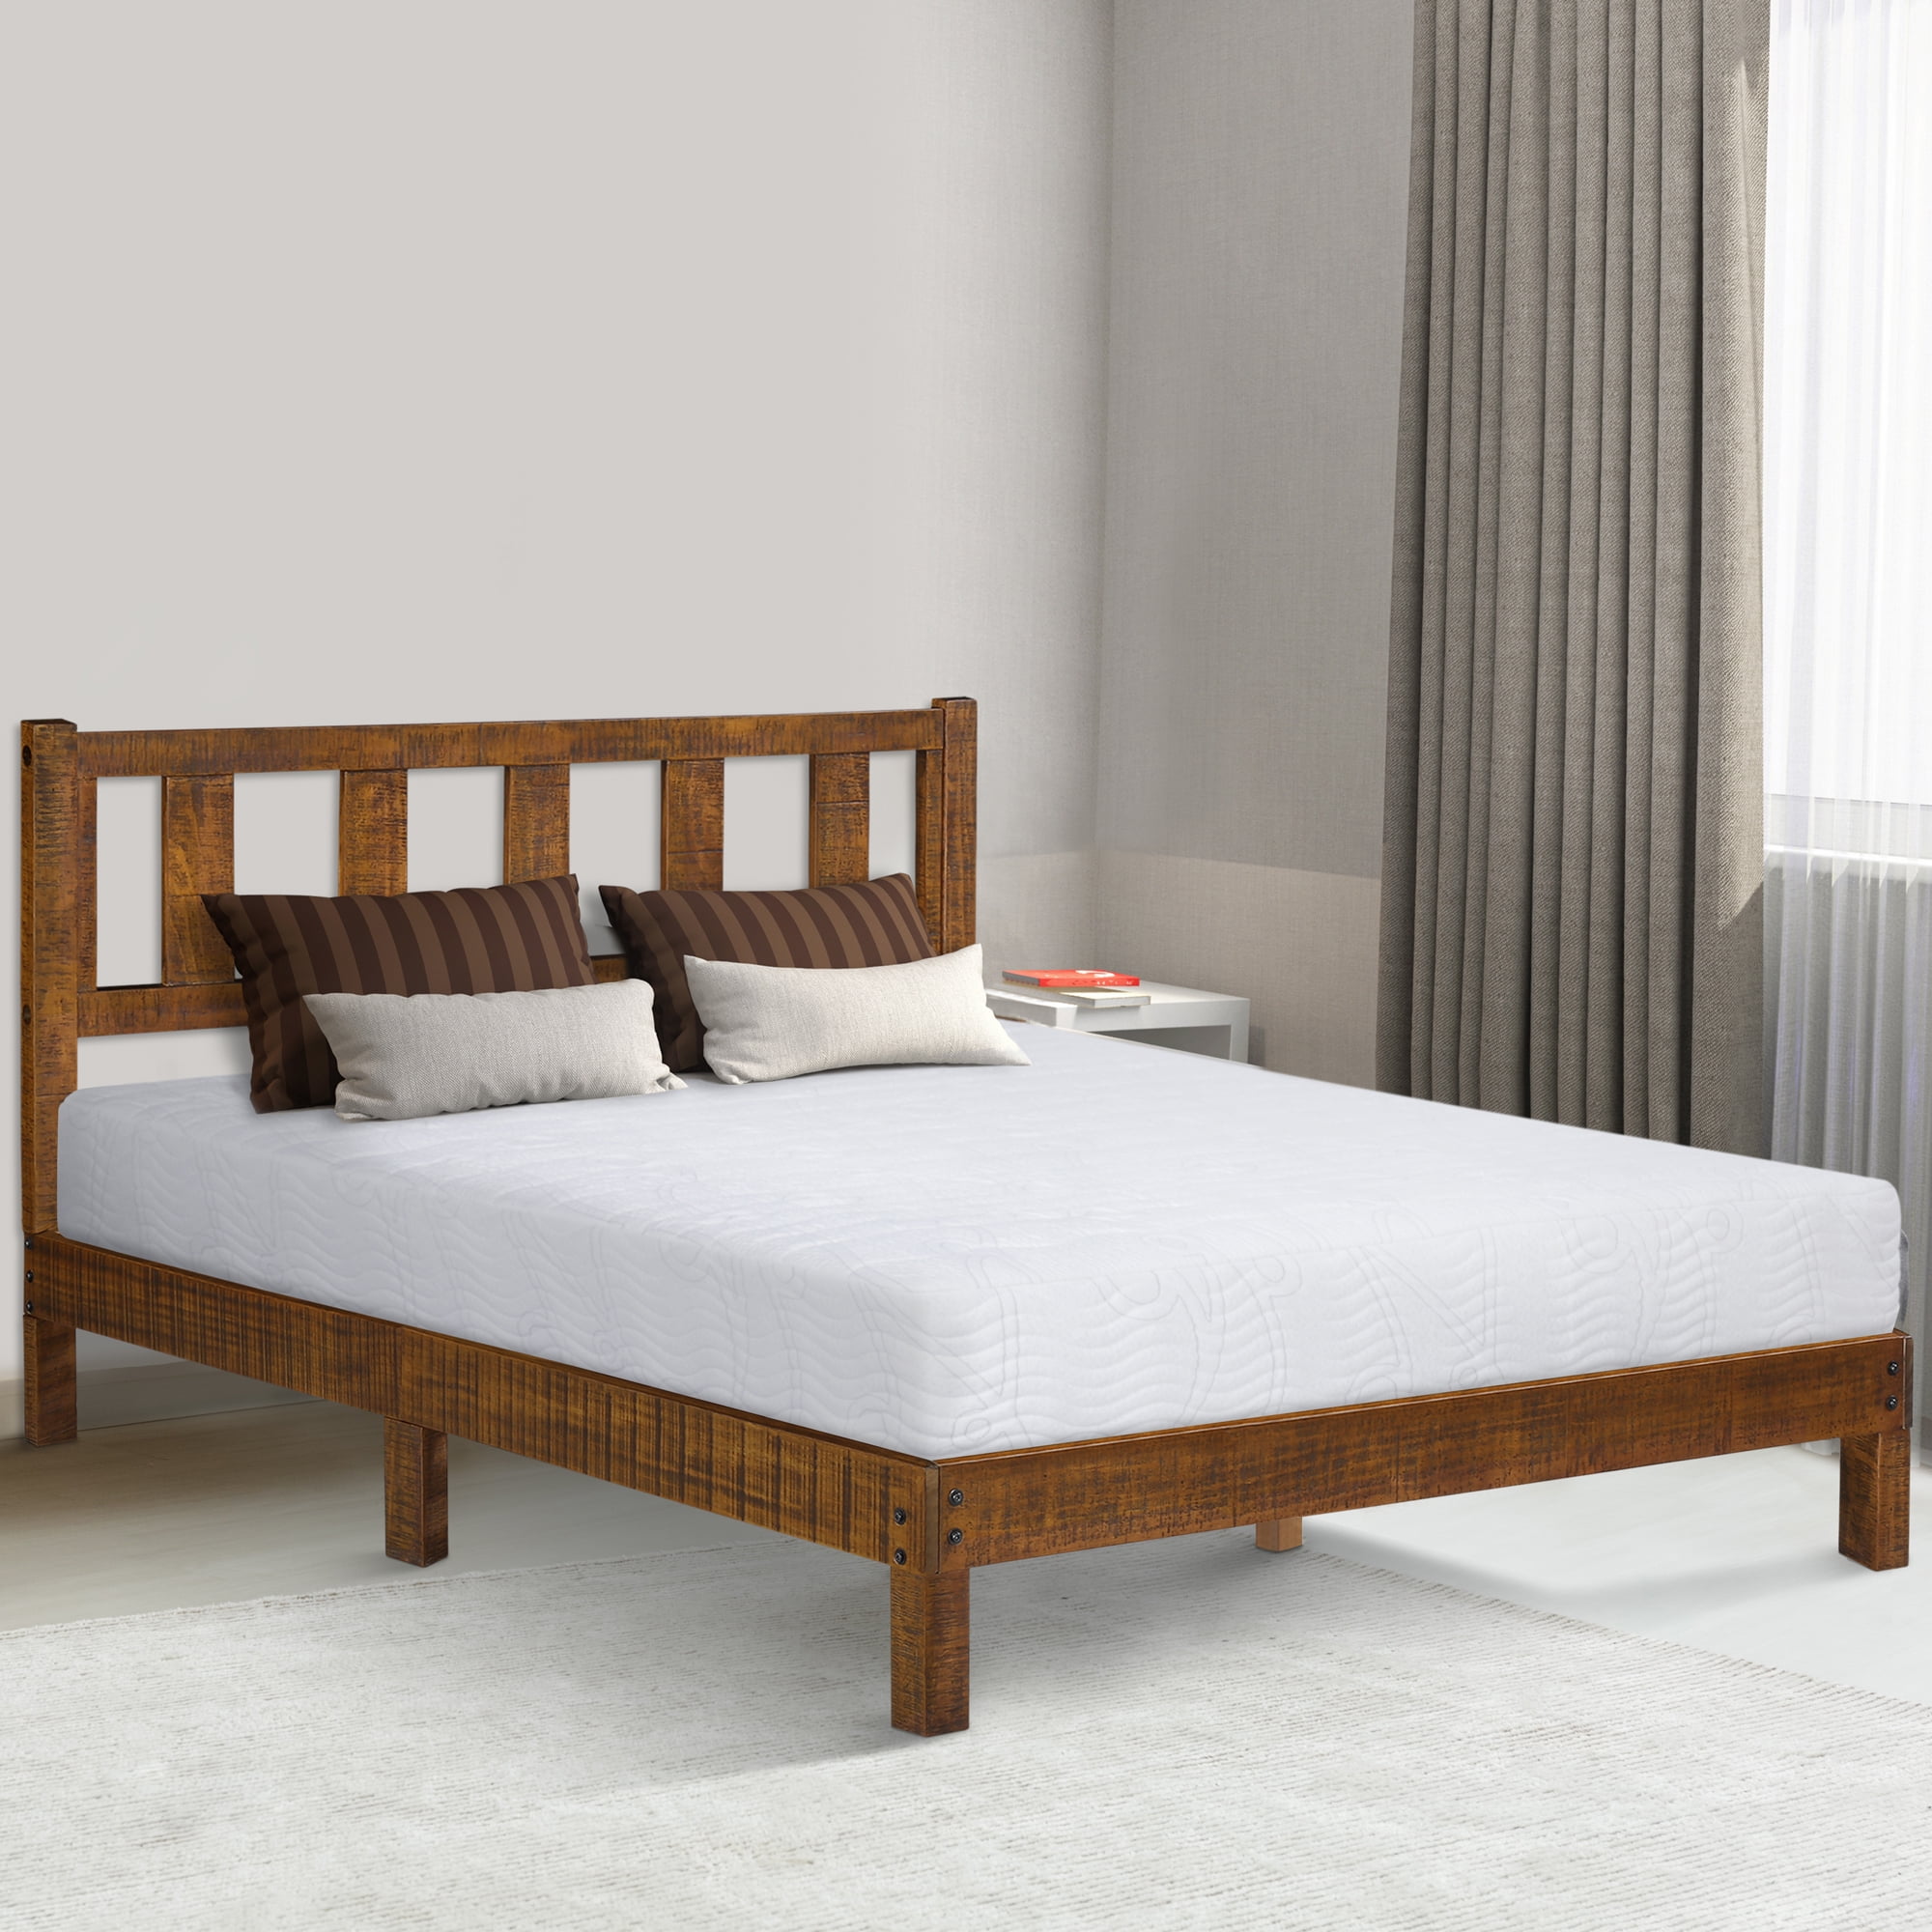 Granrest 14 Inch Deluxe Solid Wood, Solid Wood Headboards King Size Beds